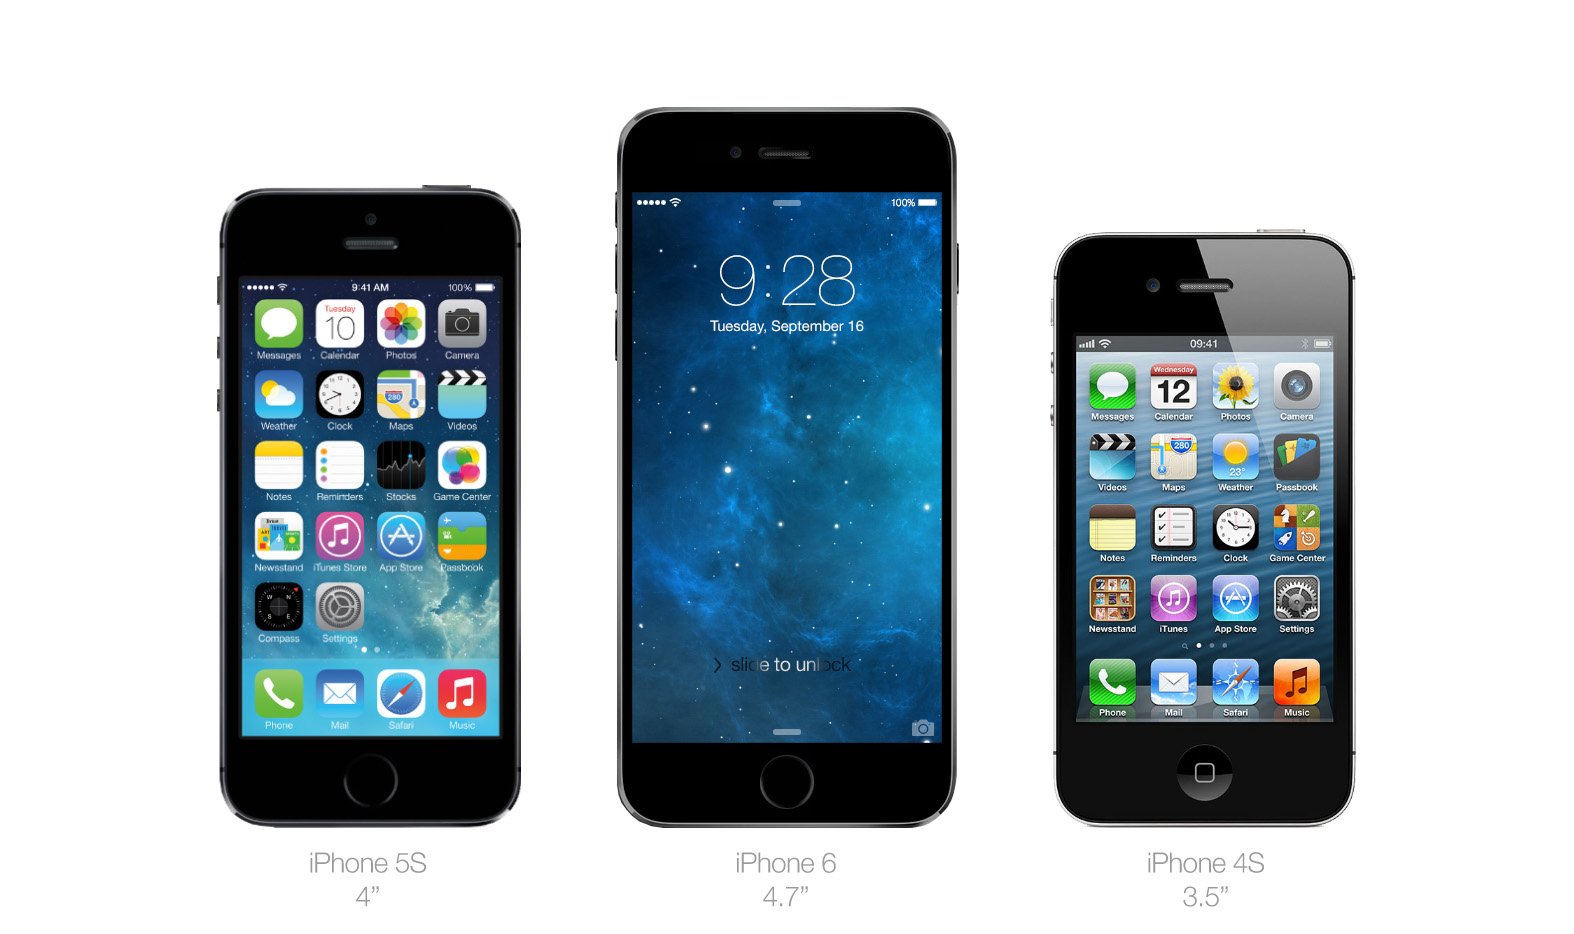 lotus Zwerver Gooi iPhone 6 vs. iPhone 4: What We Know Right Now